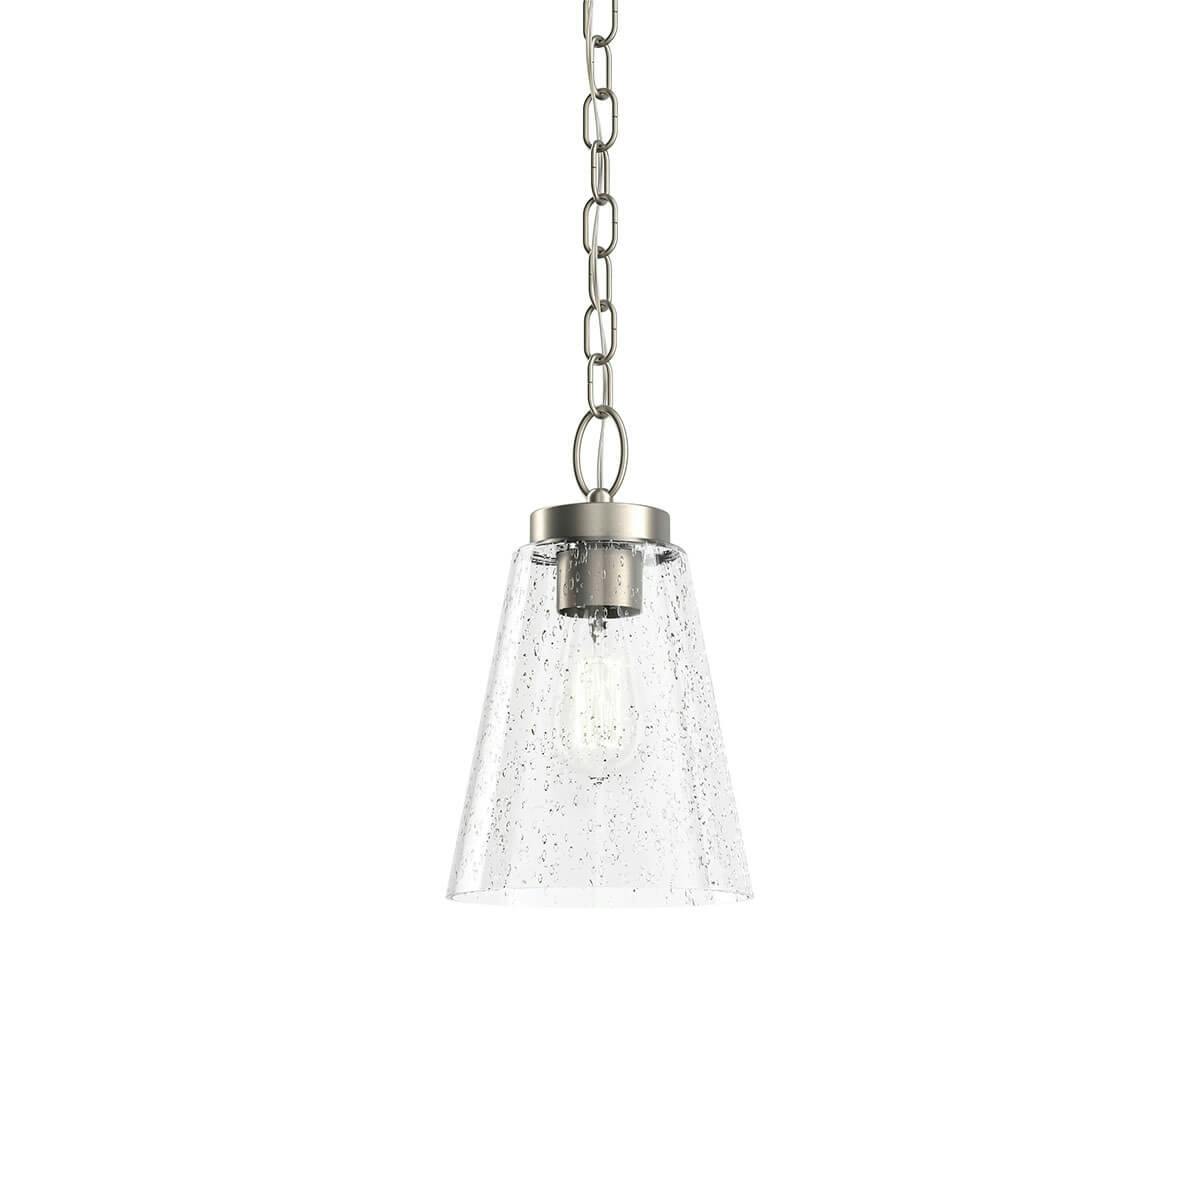 Roycroft 1 Light Pendant Brushed Nickel without the canopy on a white background